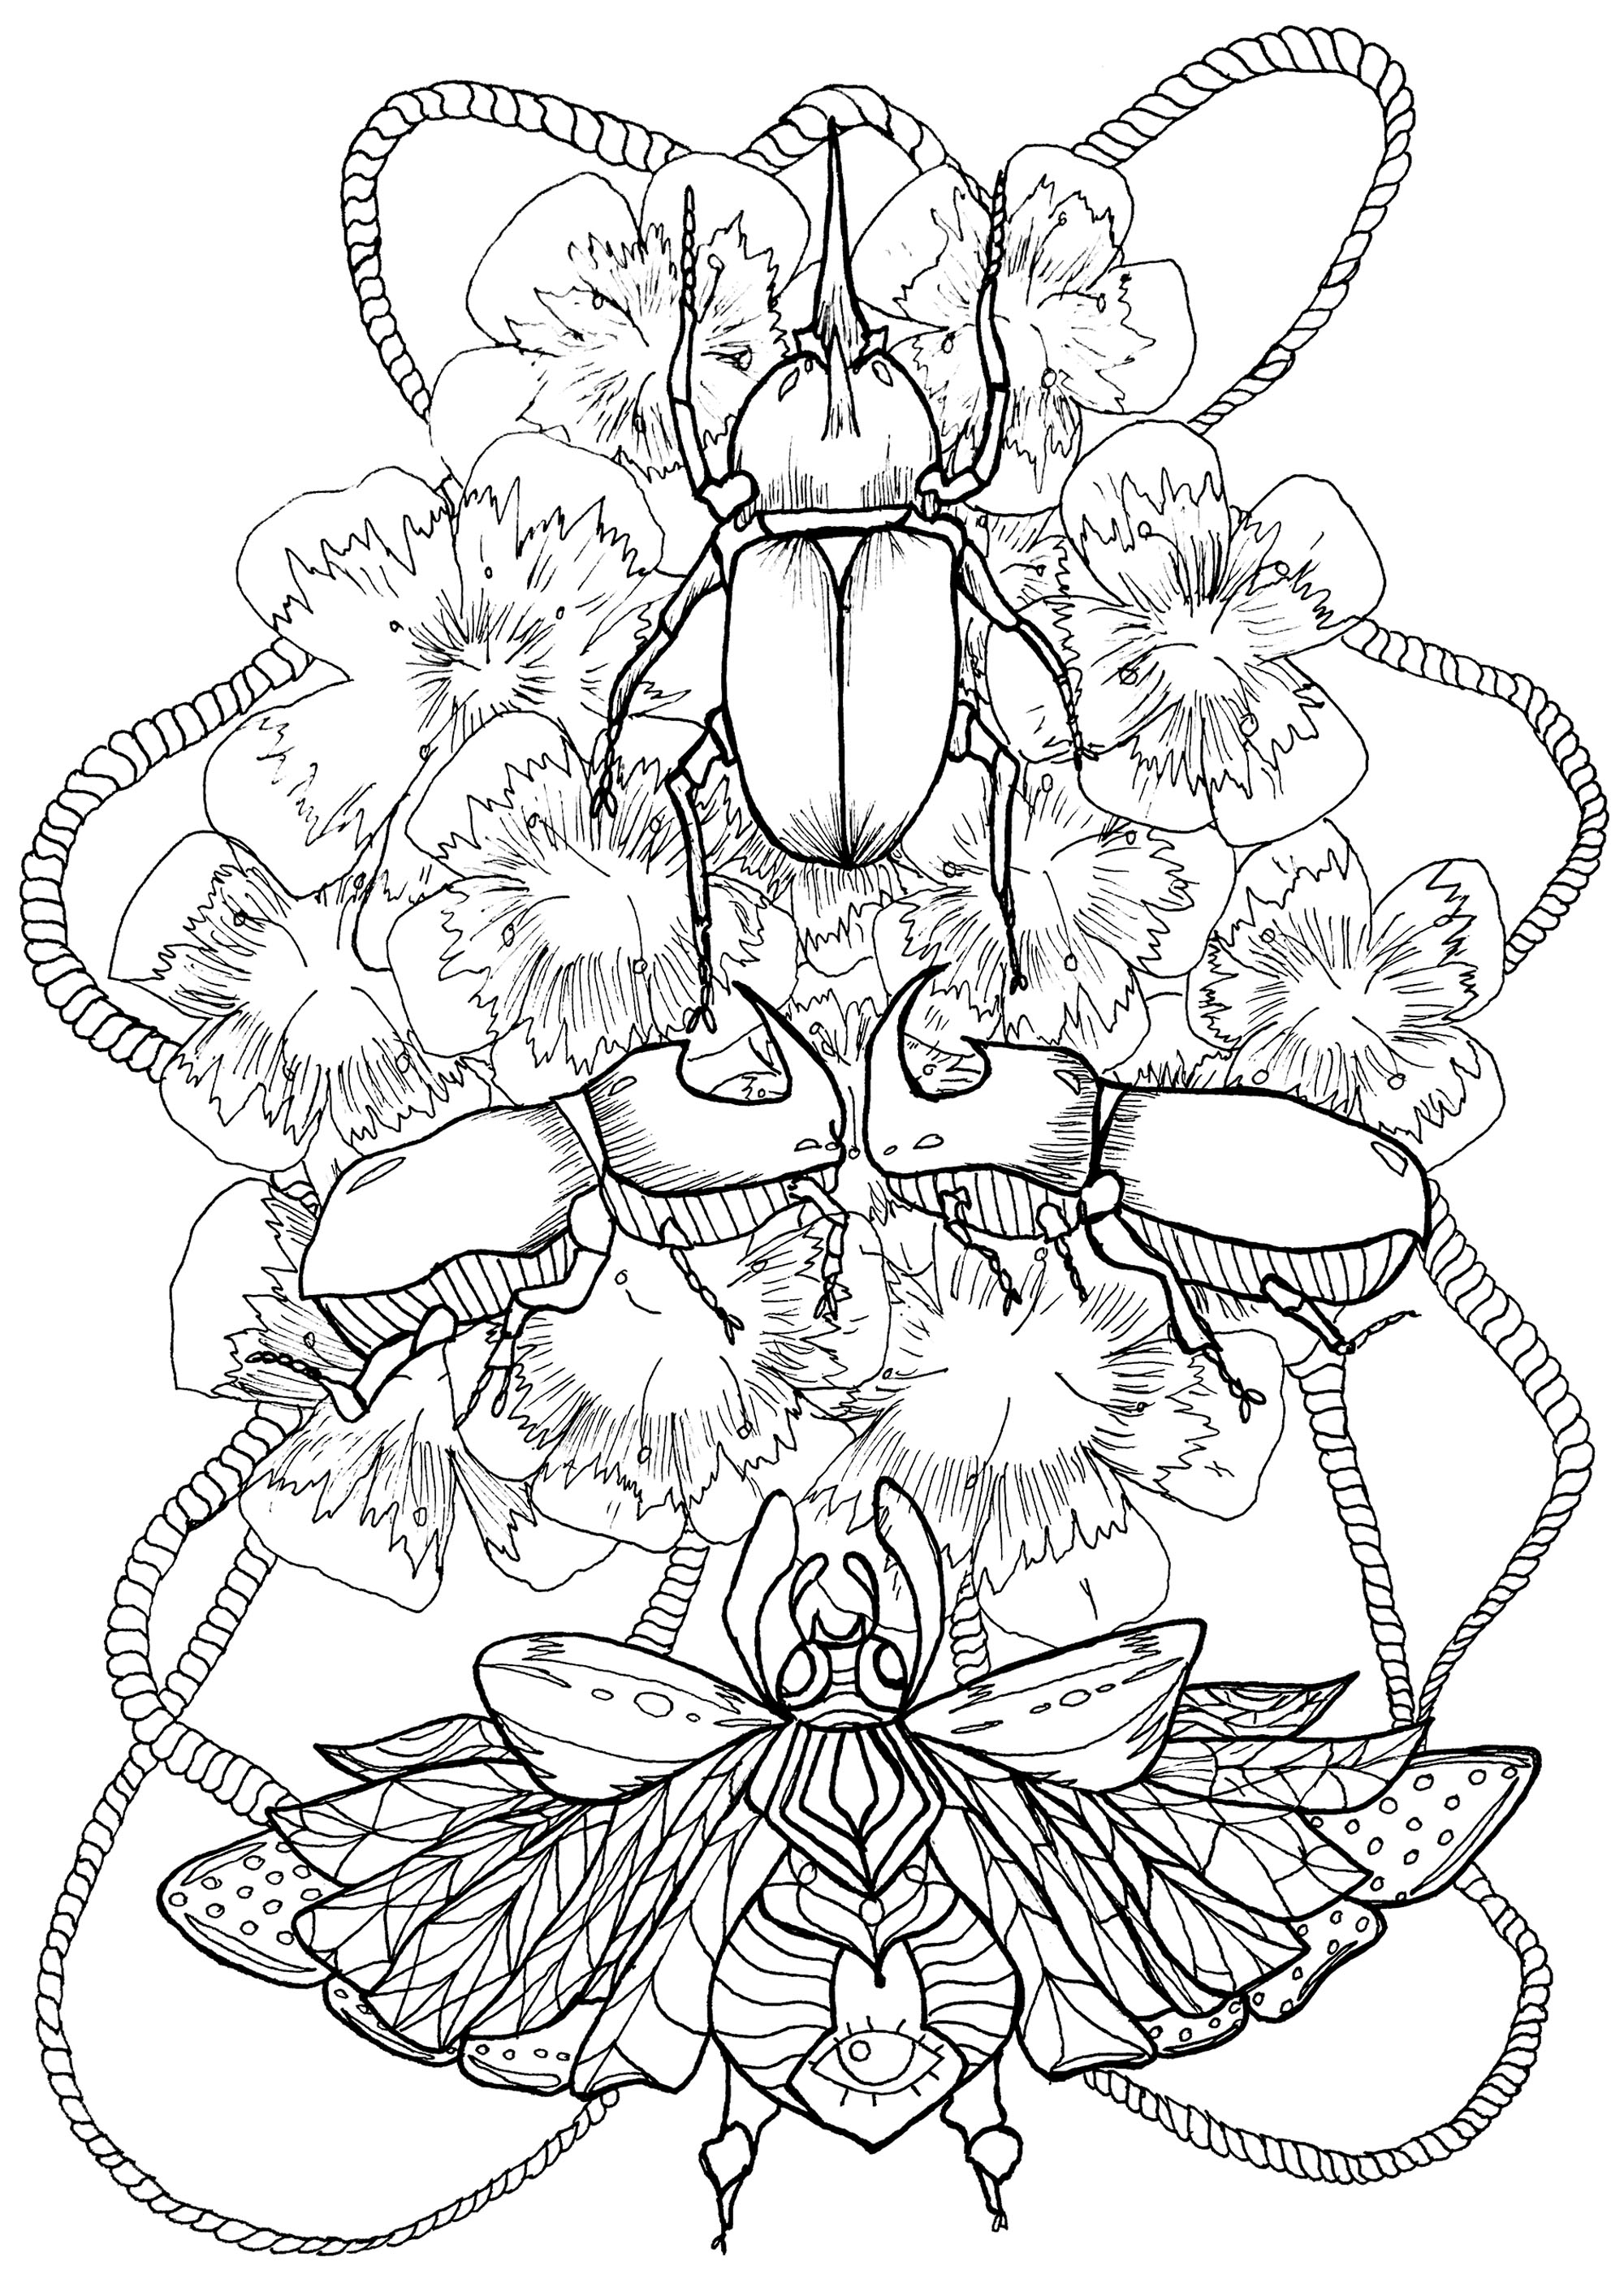 Beautiful coloring with flowers and beetles, surrounded by finely braided rope. Our artist drew inspiration from her favorite insects and flowers to create this highly original and uniquely stylized coloring page, Artist : Lise